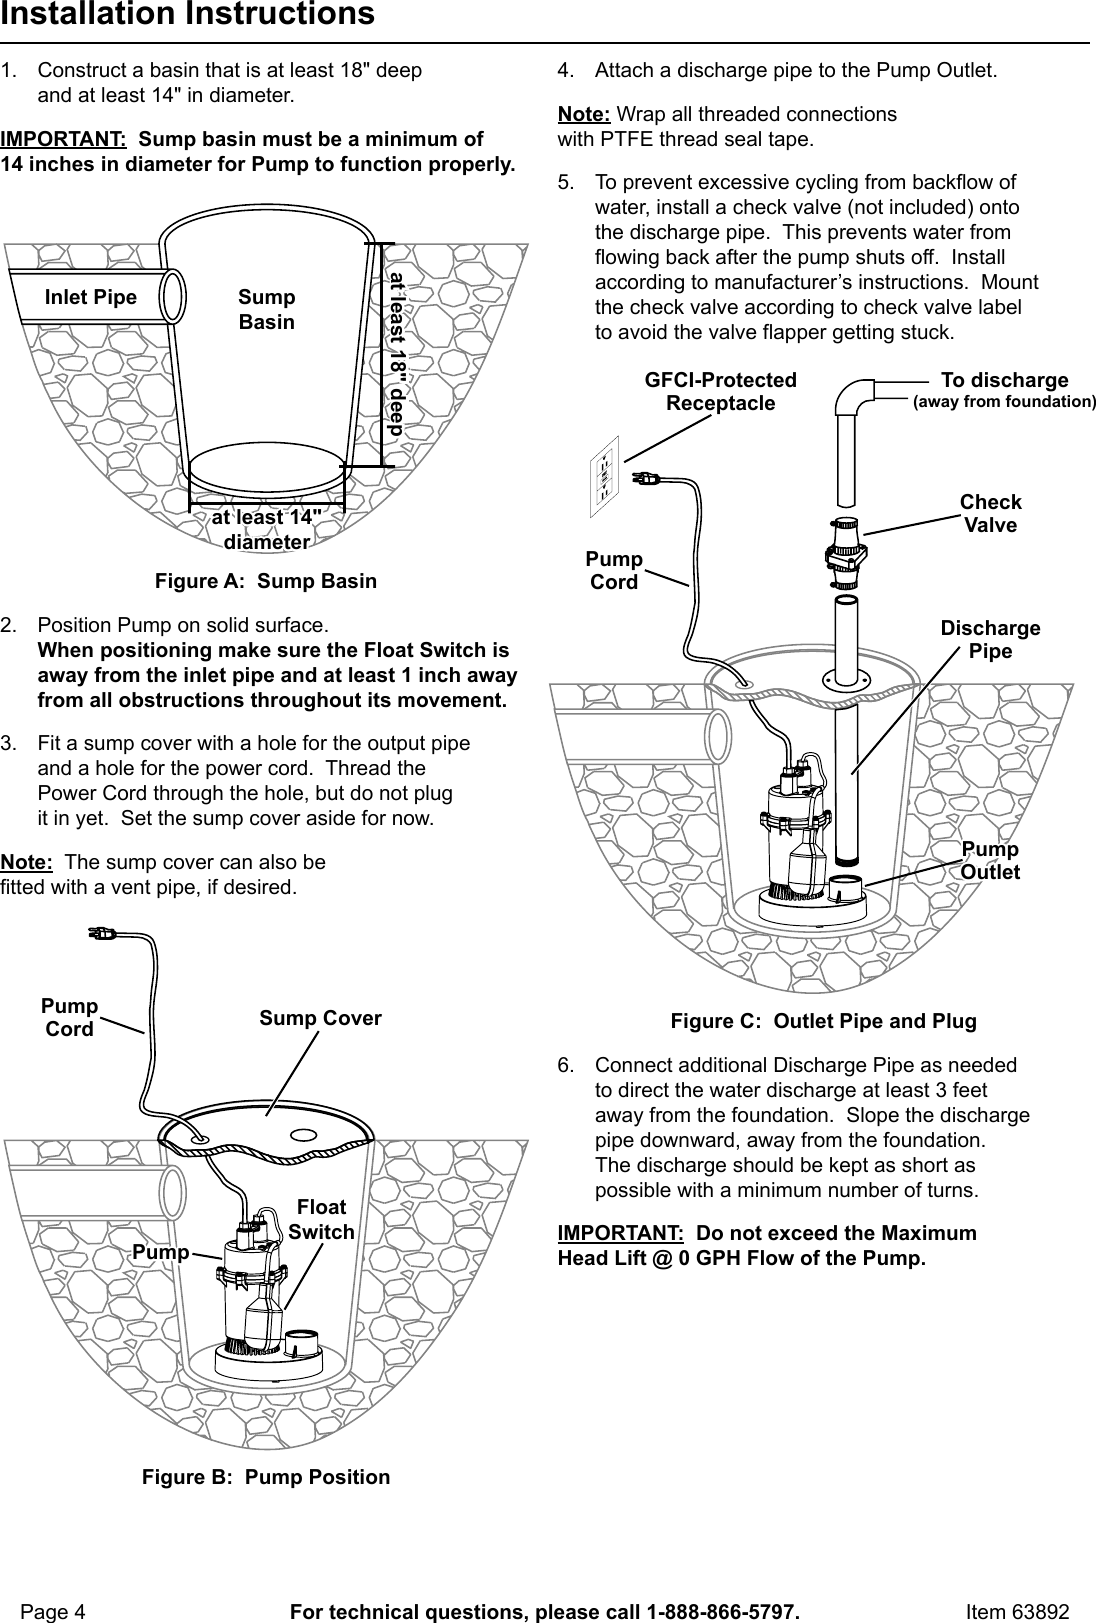 Page 4 of 8 - Manual For The 63892 1/4 HP Submersible Sump Pump 3000 GPH